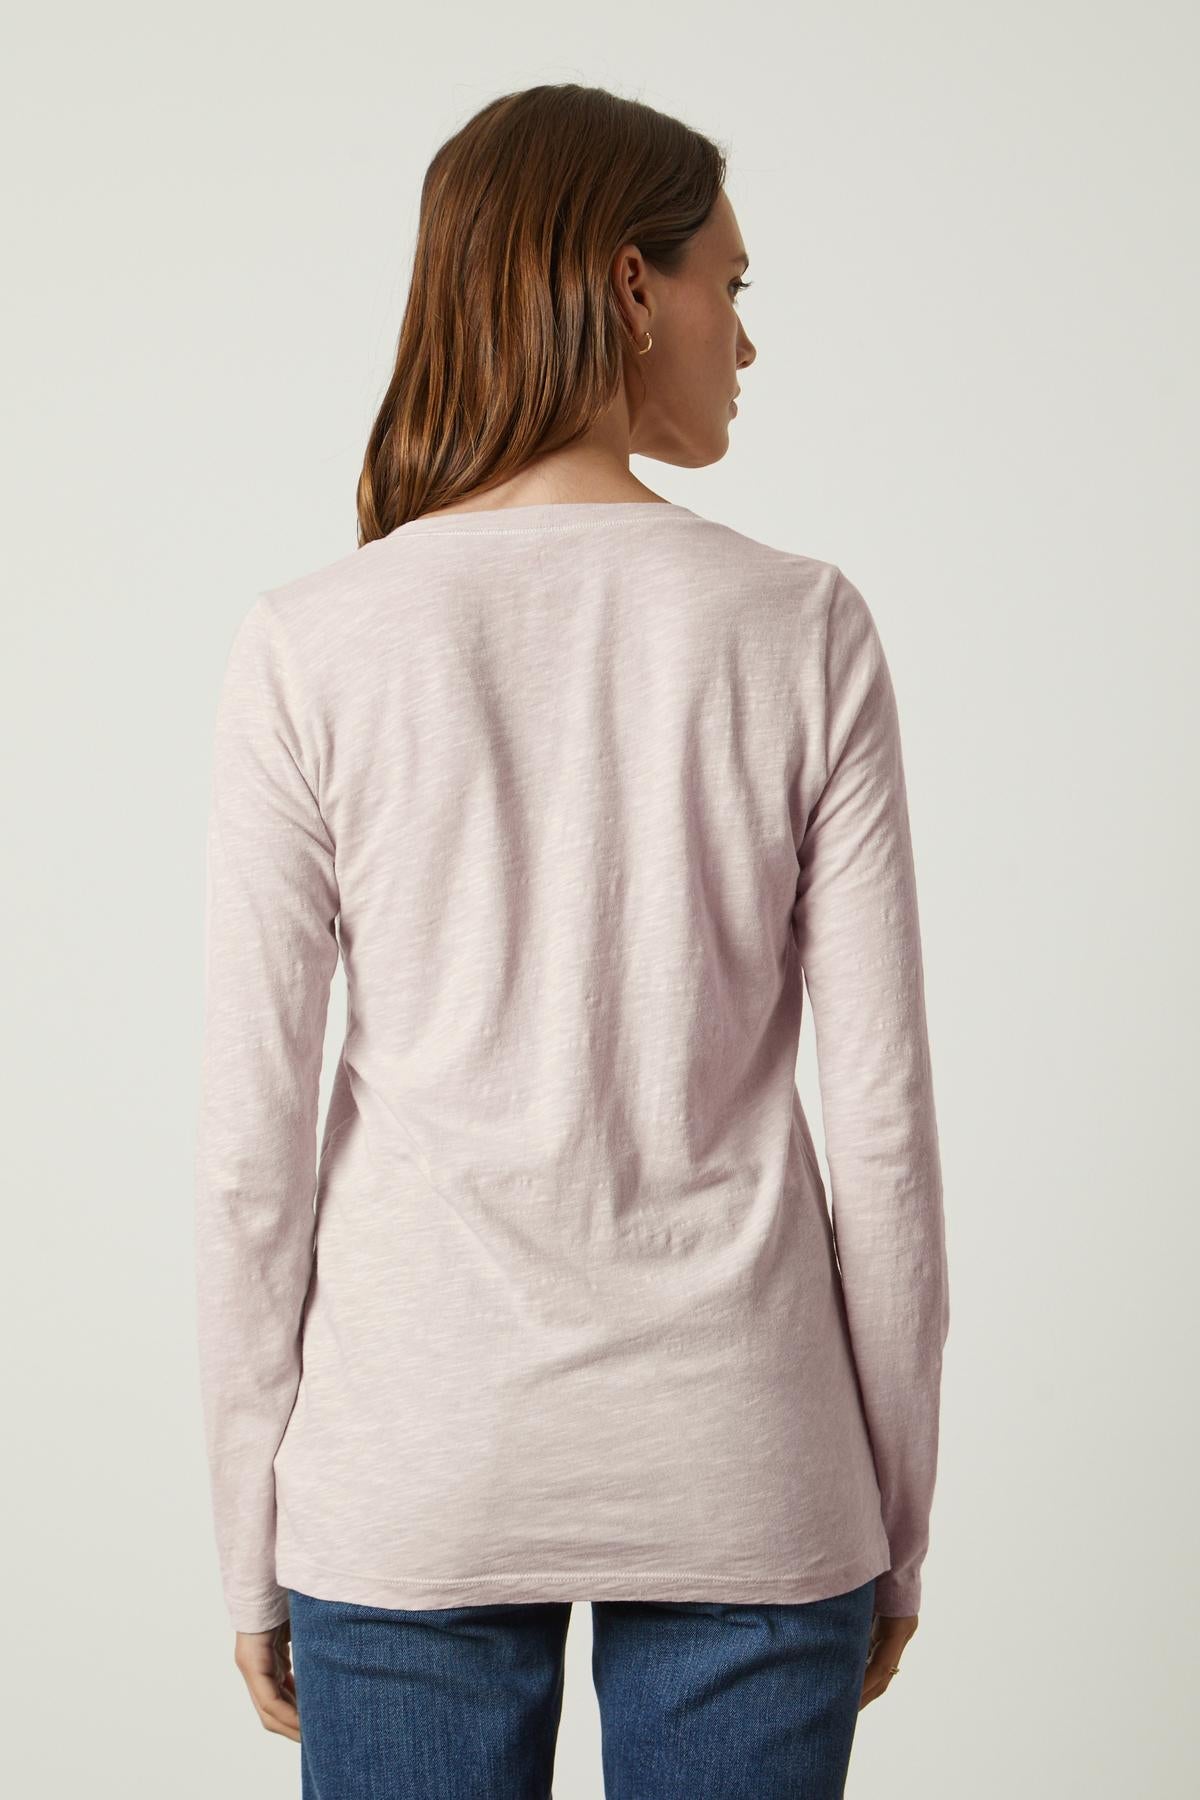   The back view of a woman wearing a long-sleeved pink BLAIRE ORIGINAL SLUB TEE made by Velvet by Graham & Spencer. 